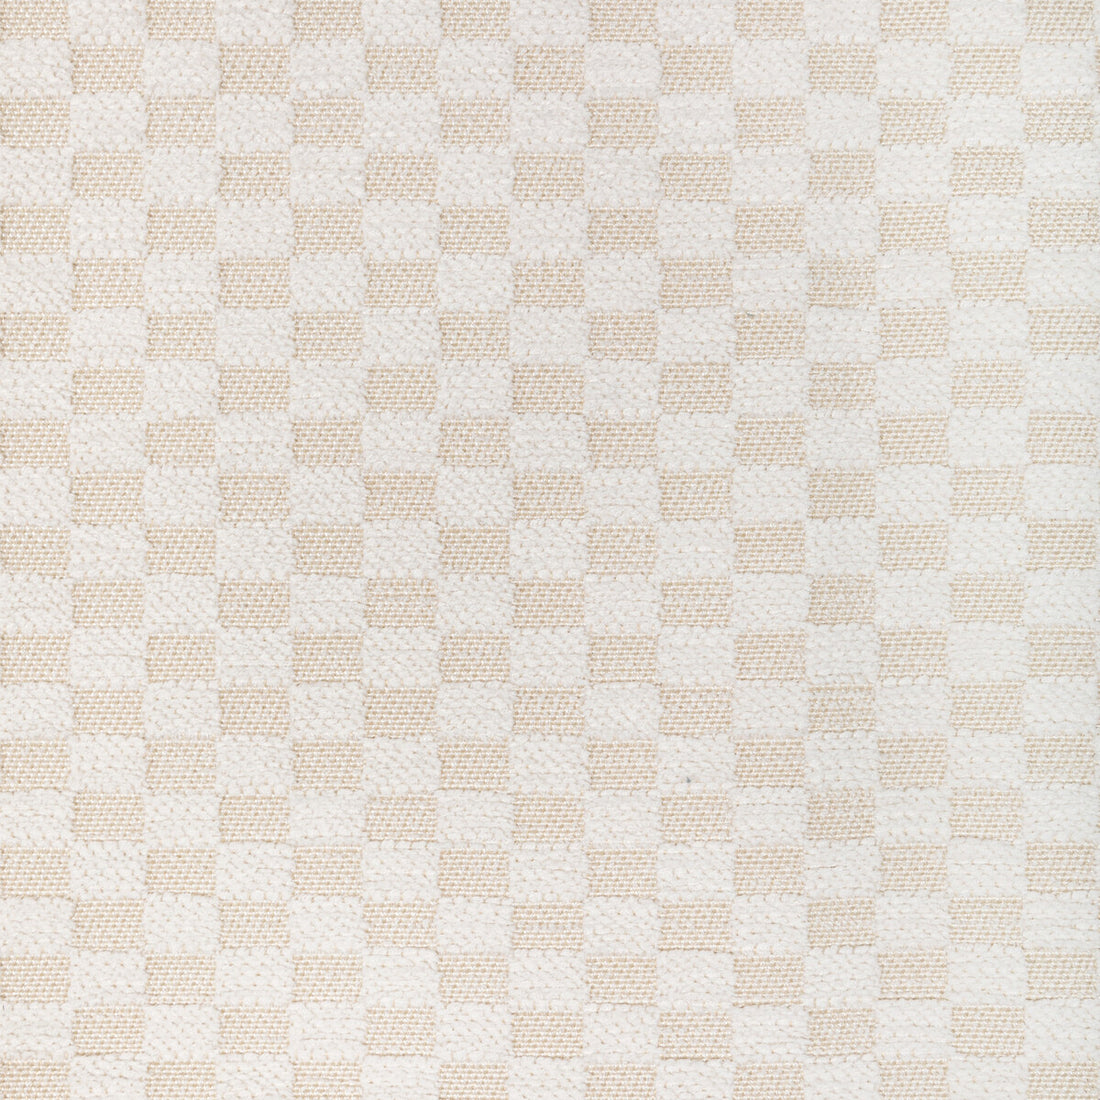 Reform fabric in fossil color - pattern 36567.1.0 - by Kravet Contract in the Seaqual collection